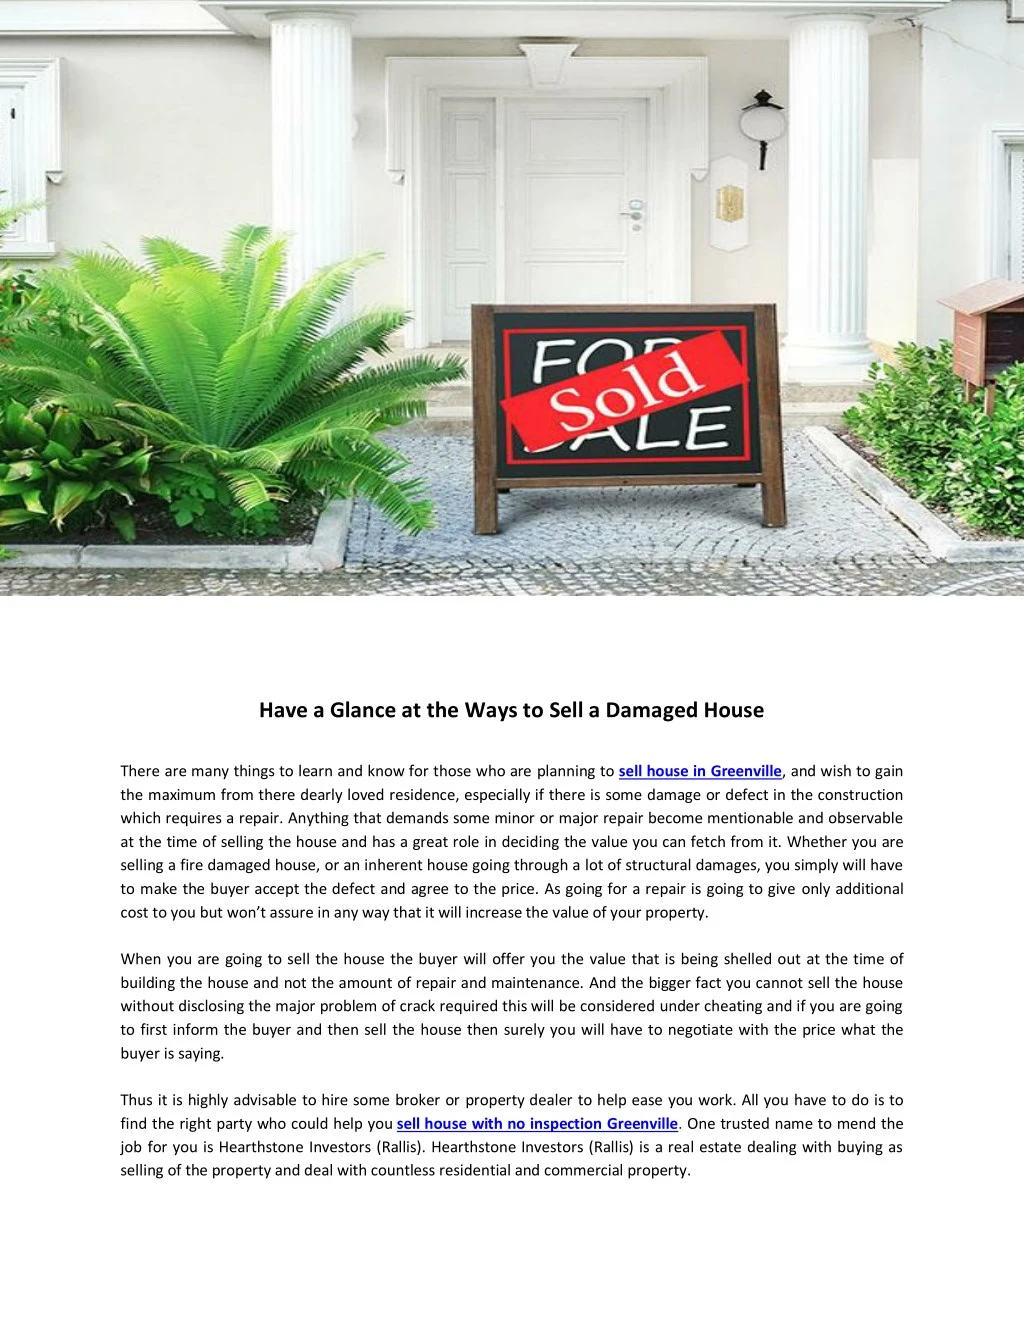 have a glance at the ways to sell a damaged house